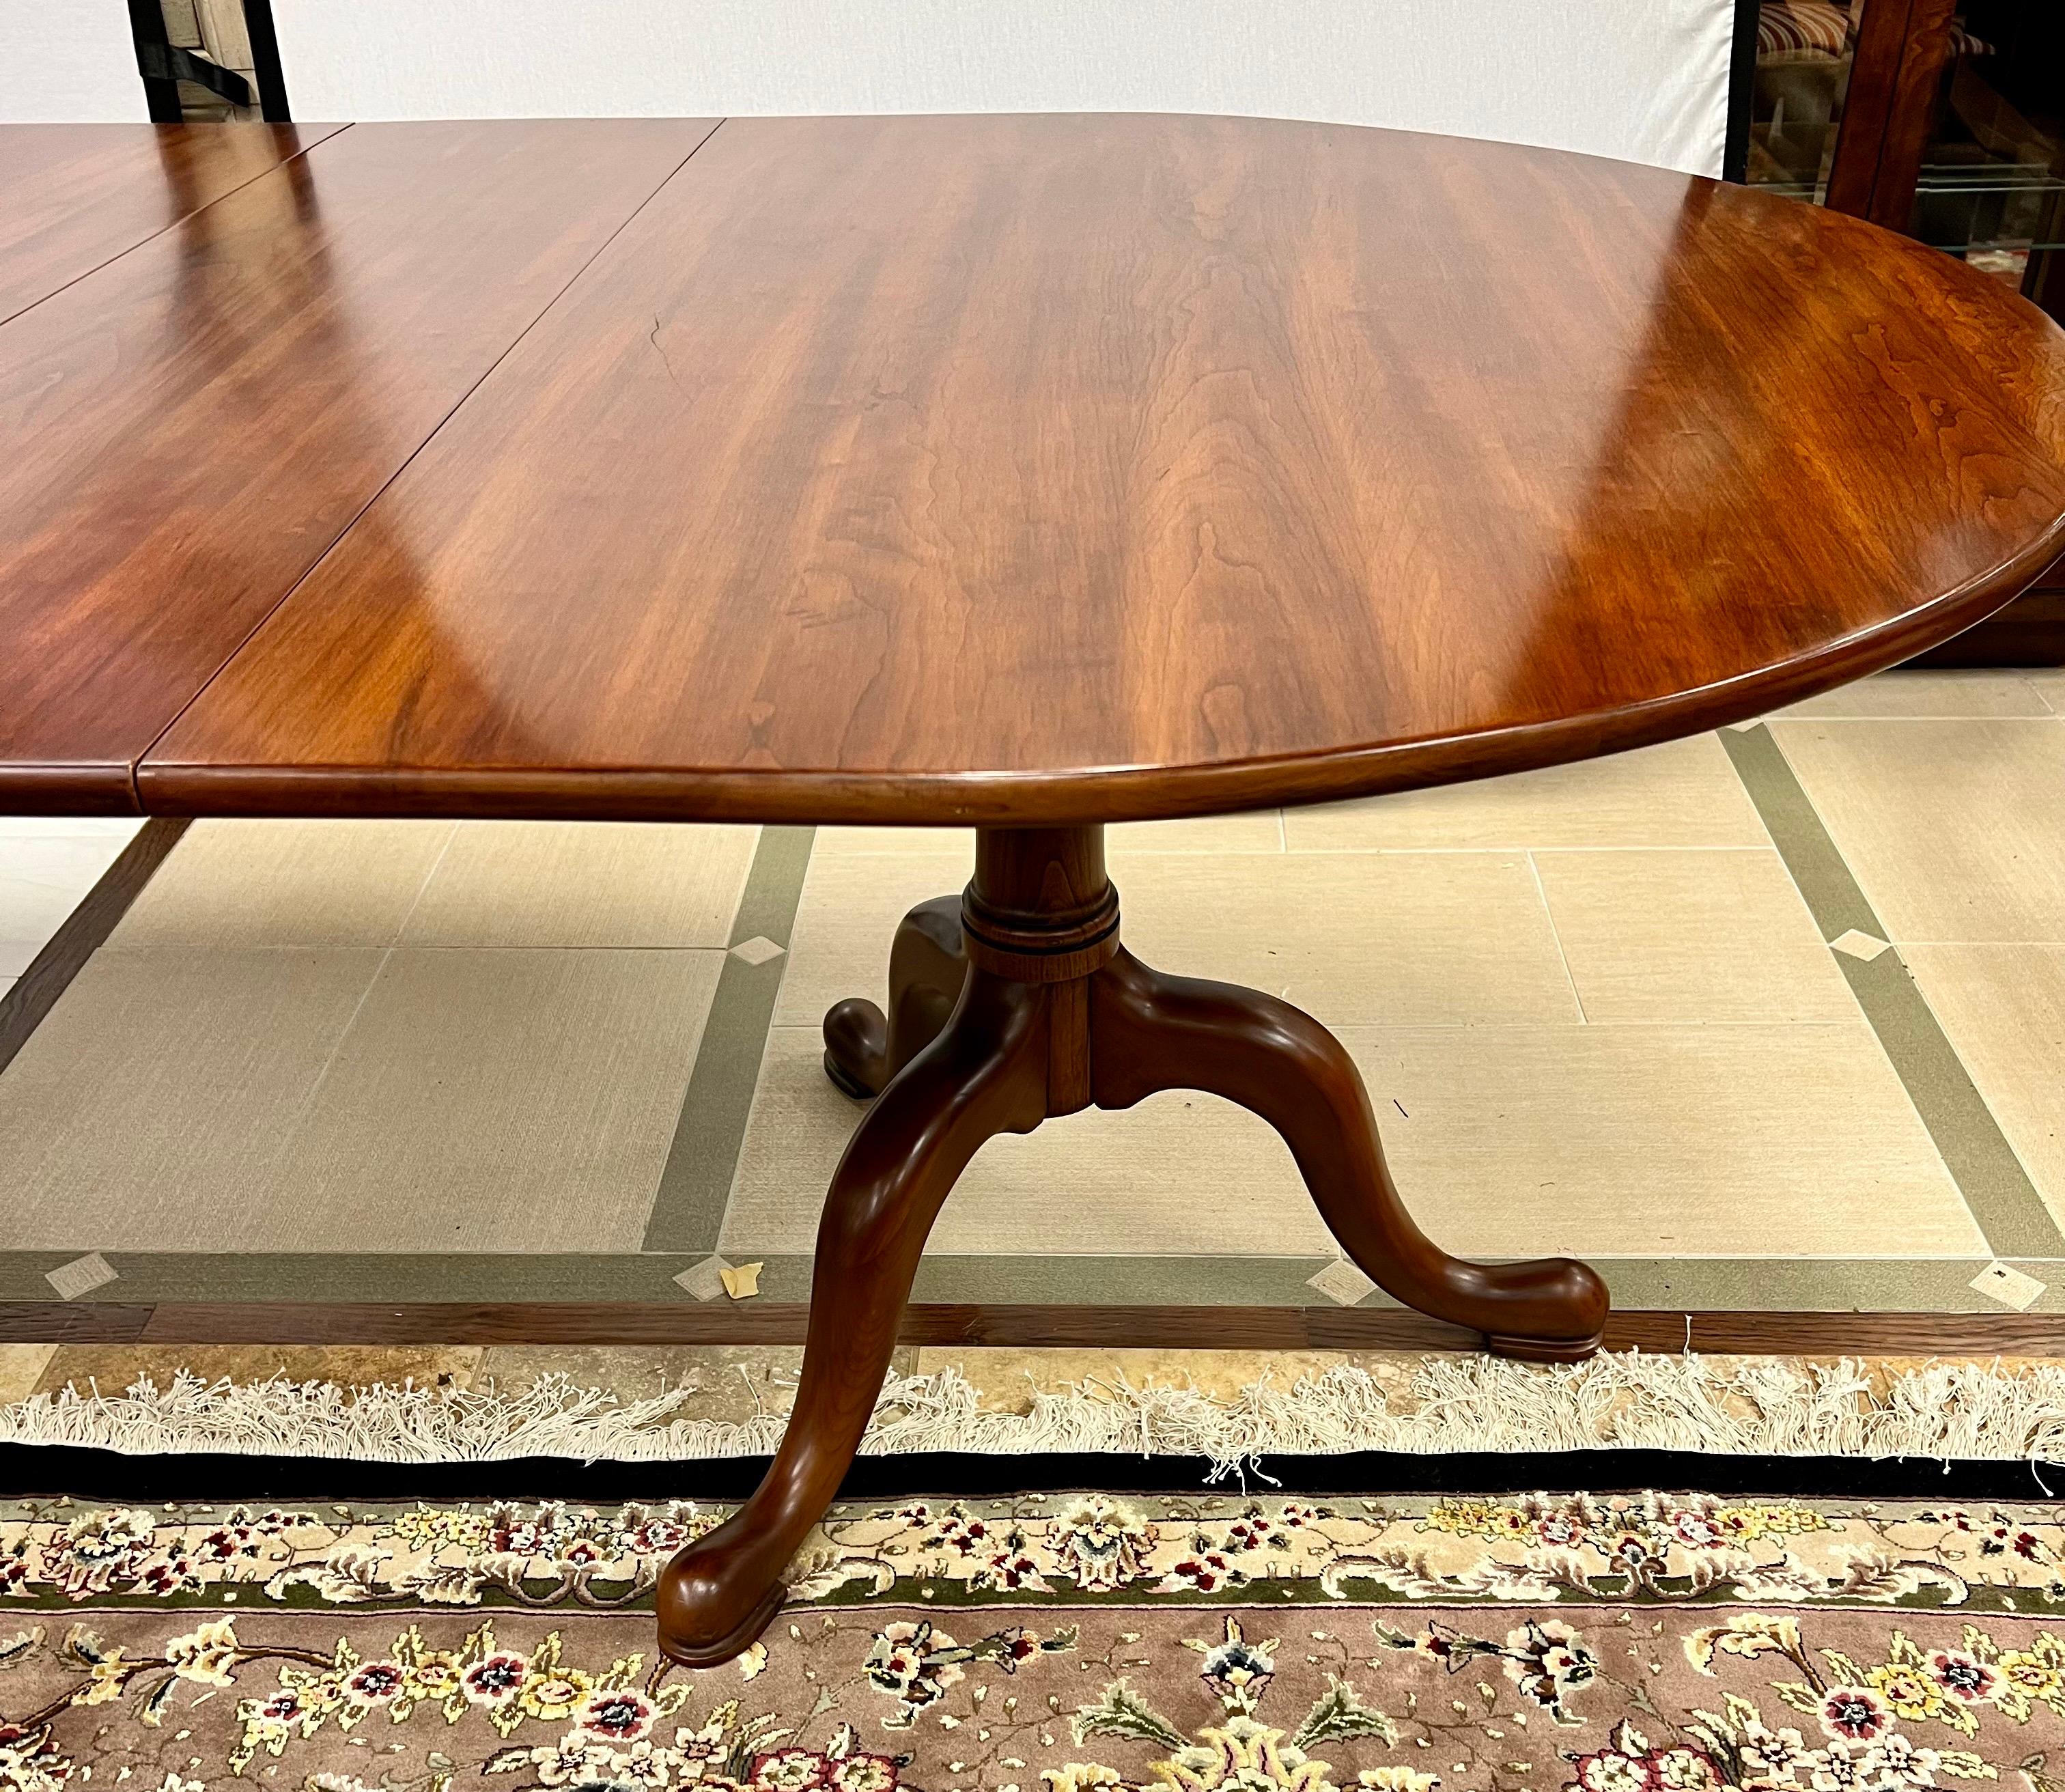 Magnificent Henkel Harris Virginia Galleries double pedestal Queen Anne style dining room table.
The oval table features four 12